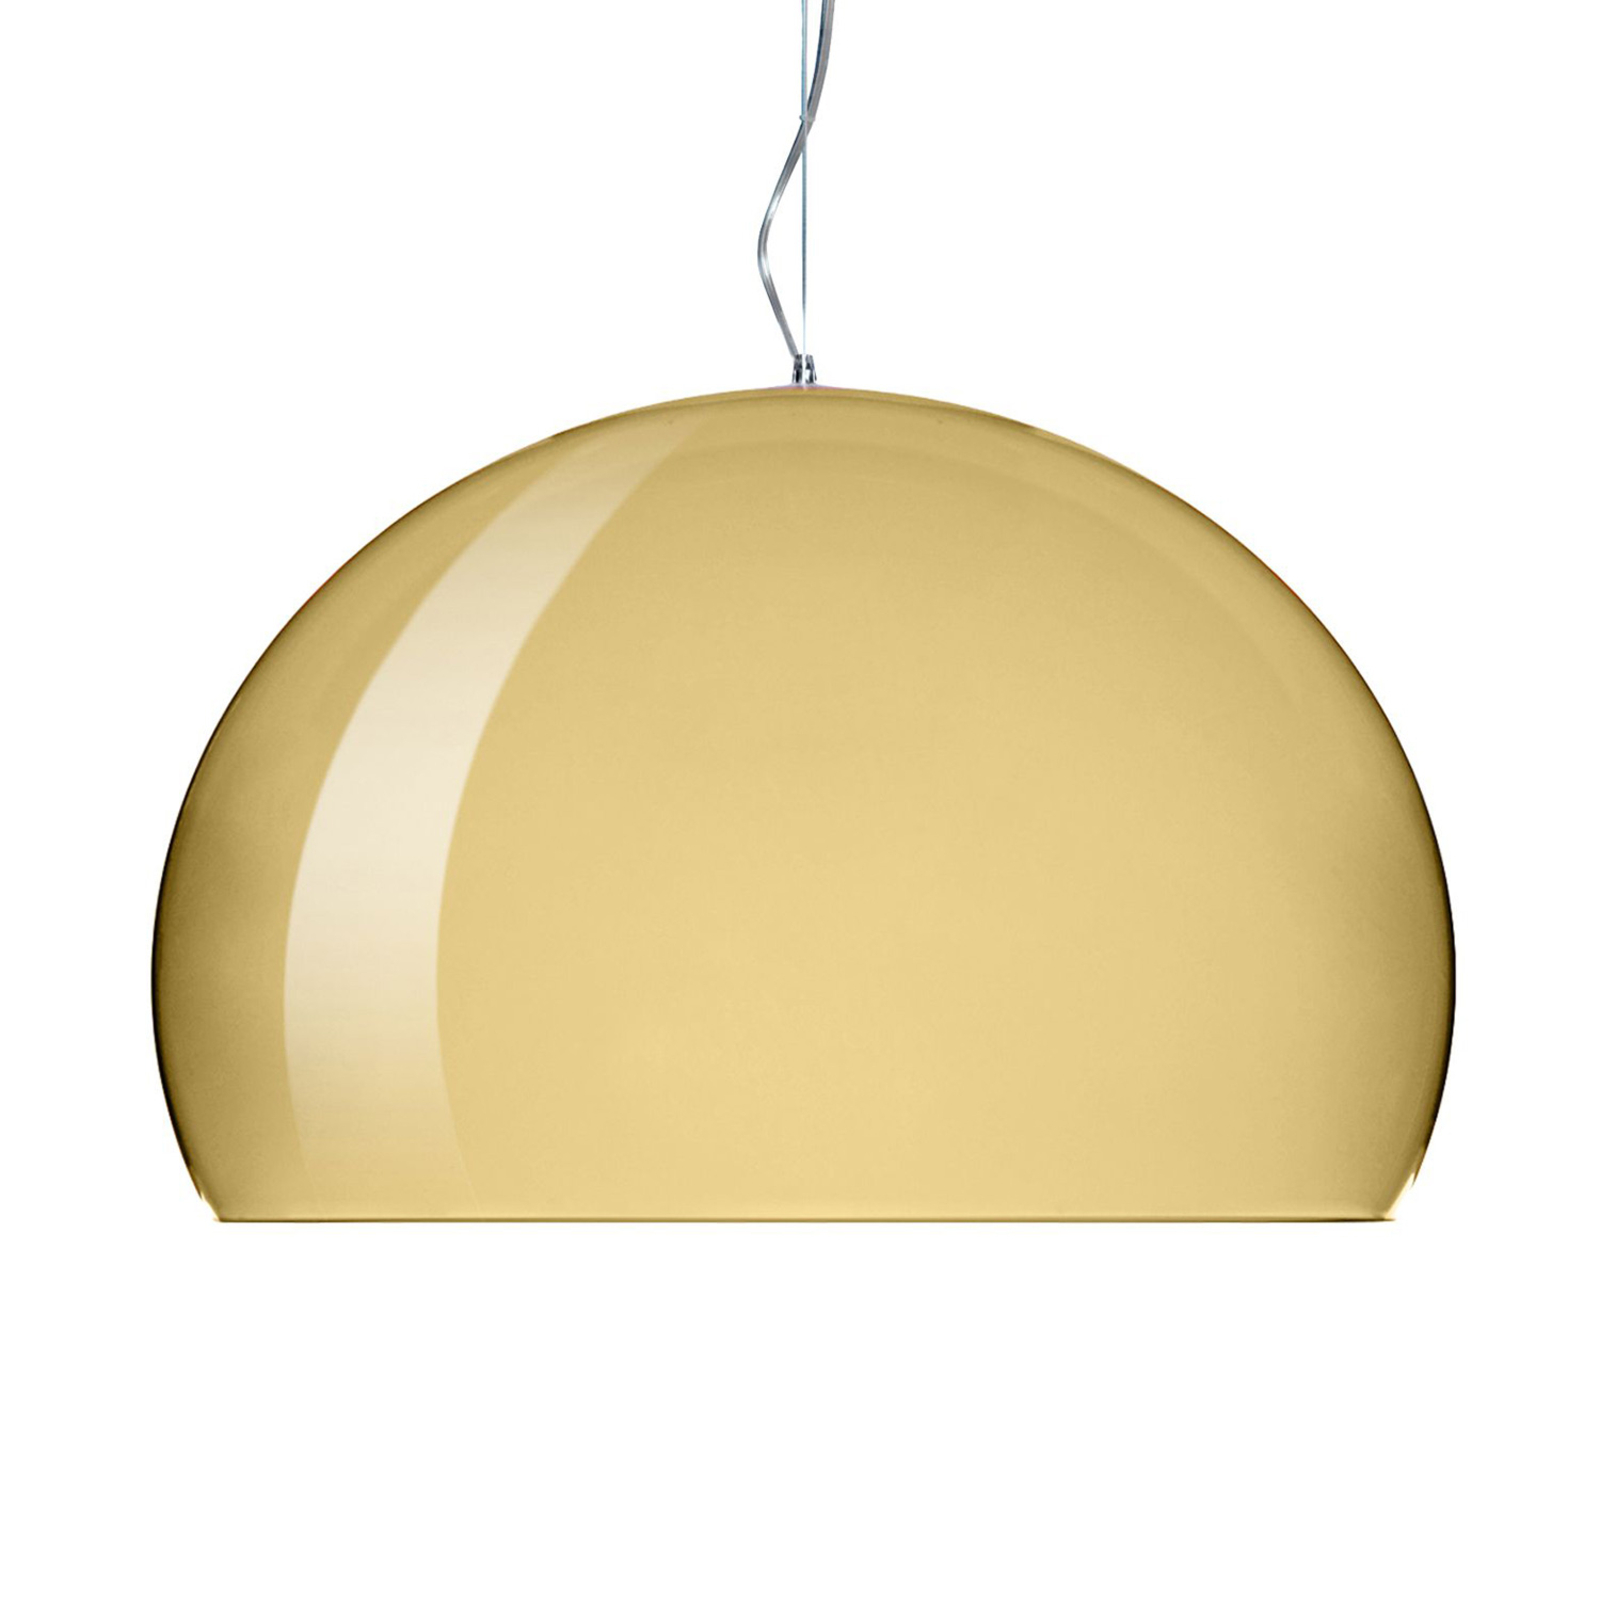 Kartell FL/Y - Candeeiro suspenso LED, ouro brilhante